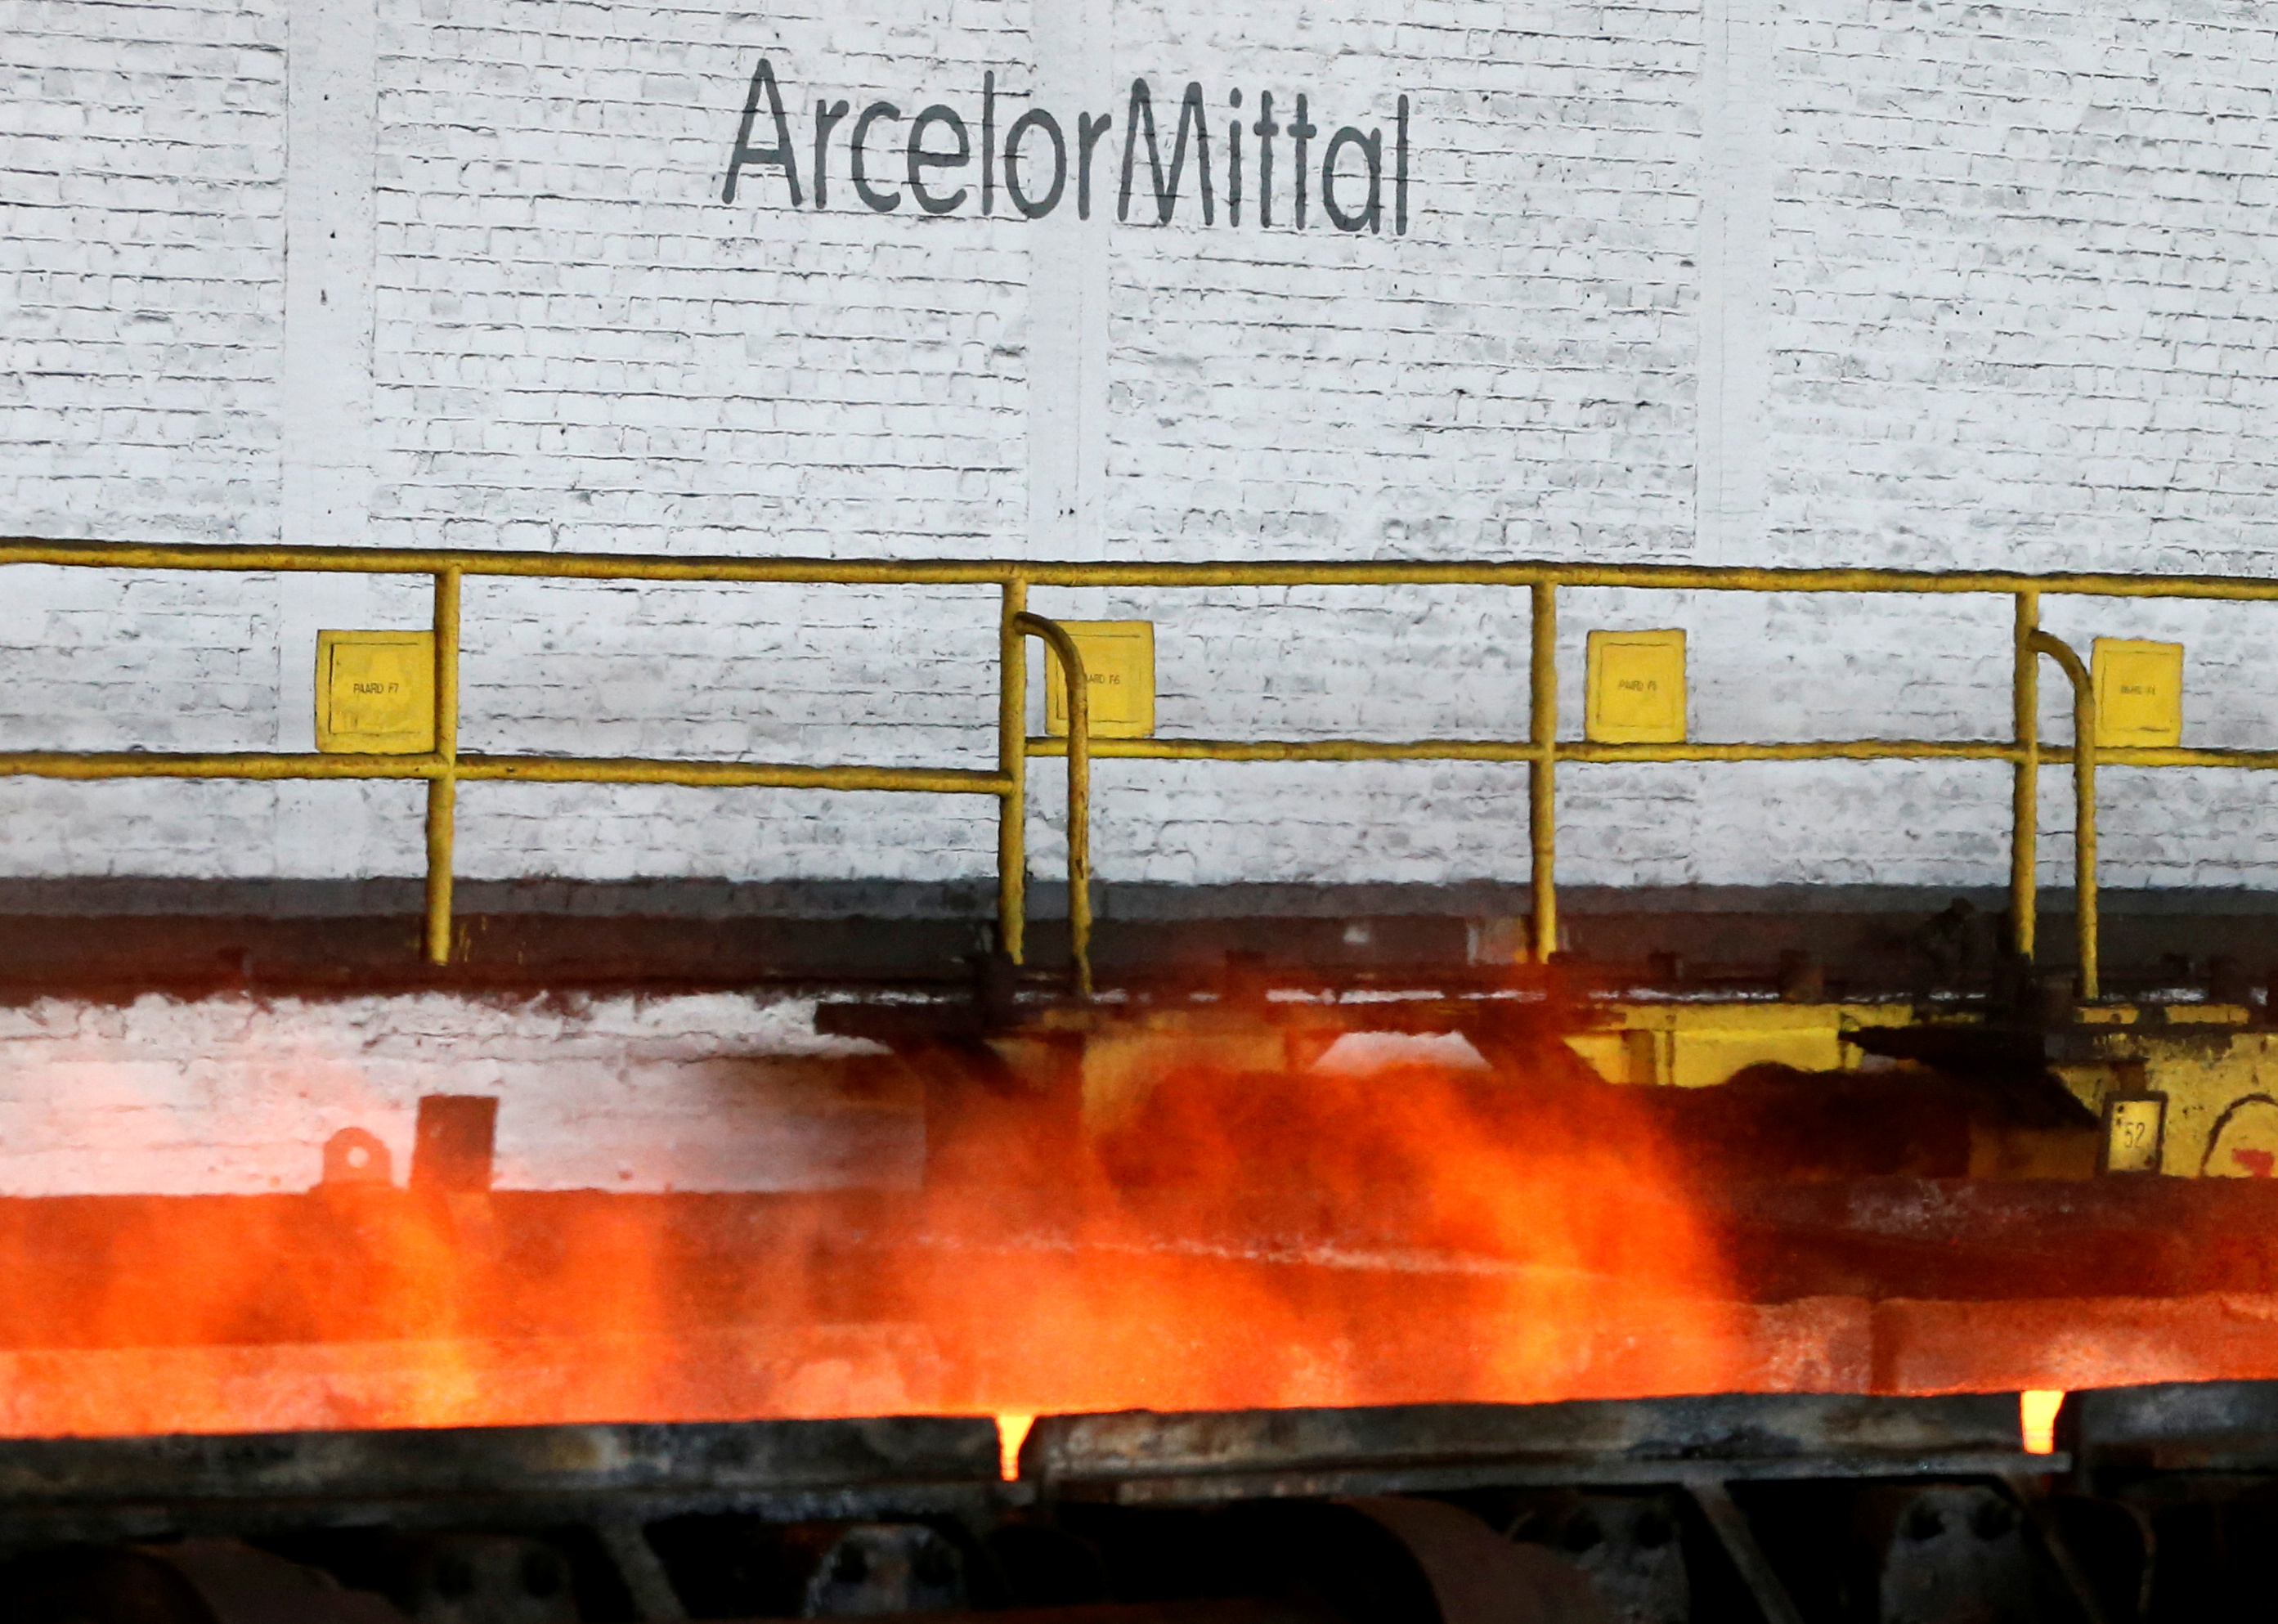 The logo of ArcelorMittal is pictured in front of heat rising from a red-hot steel plate at the ArcelorMittal steel plant in Ghent